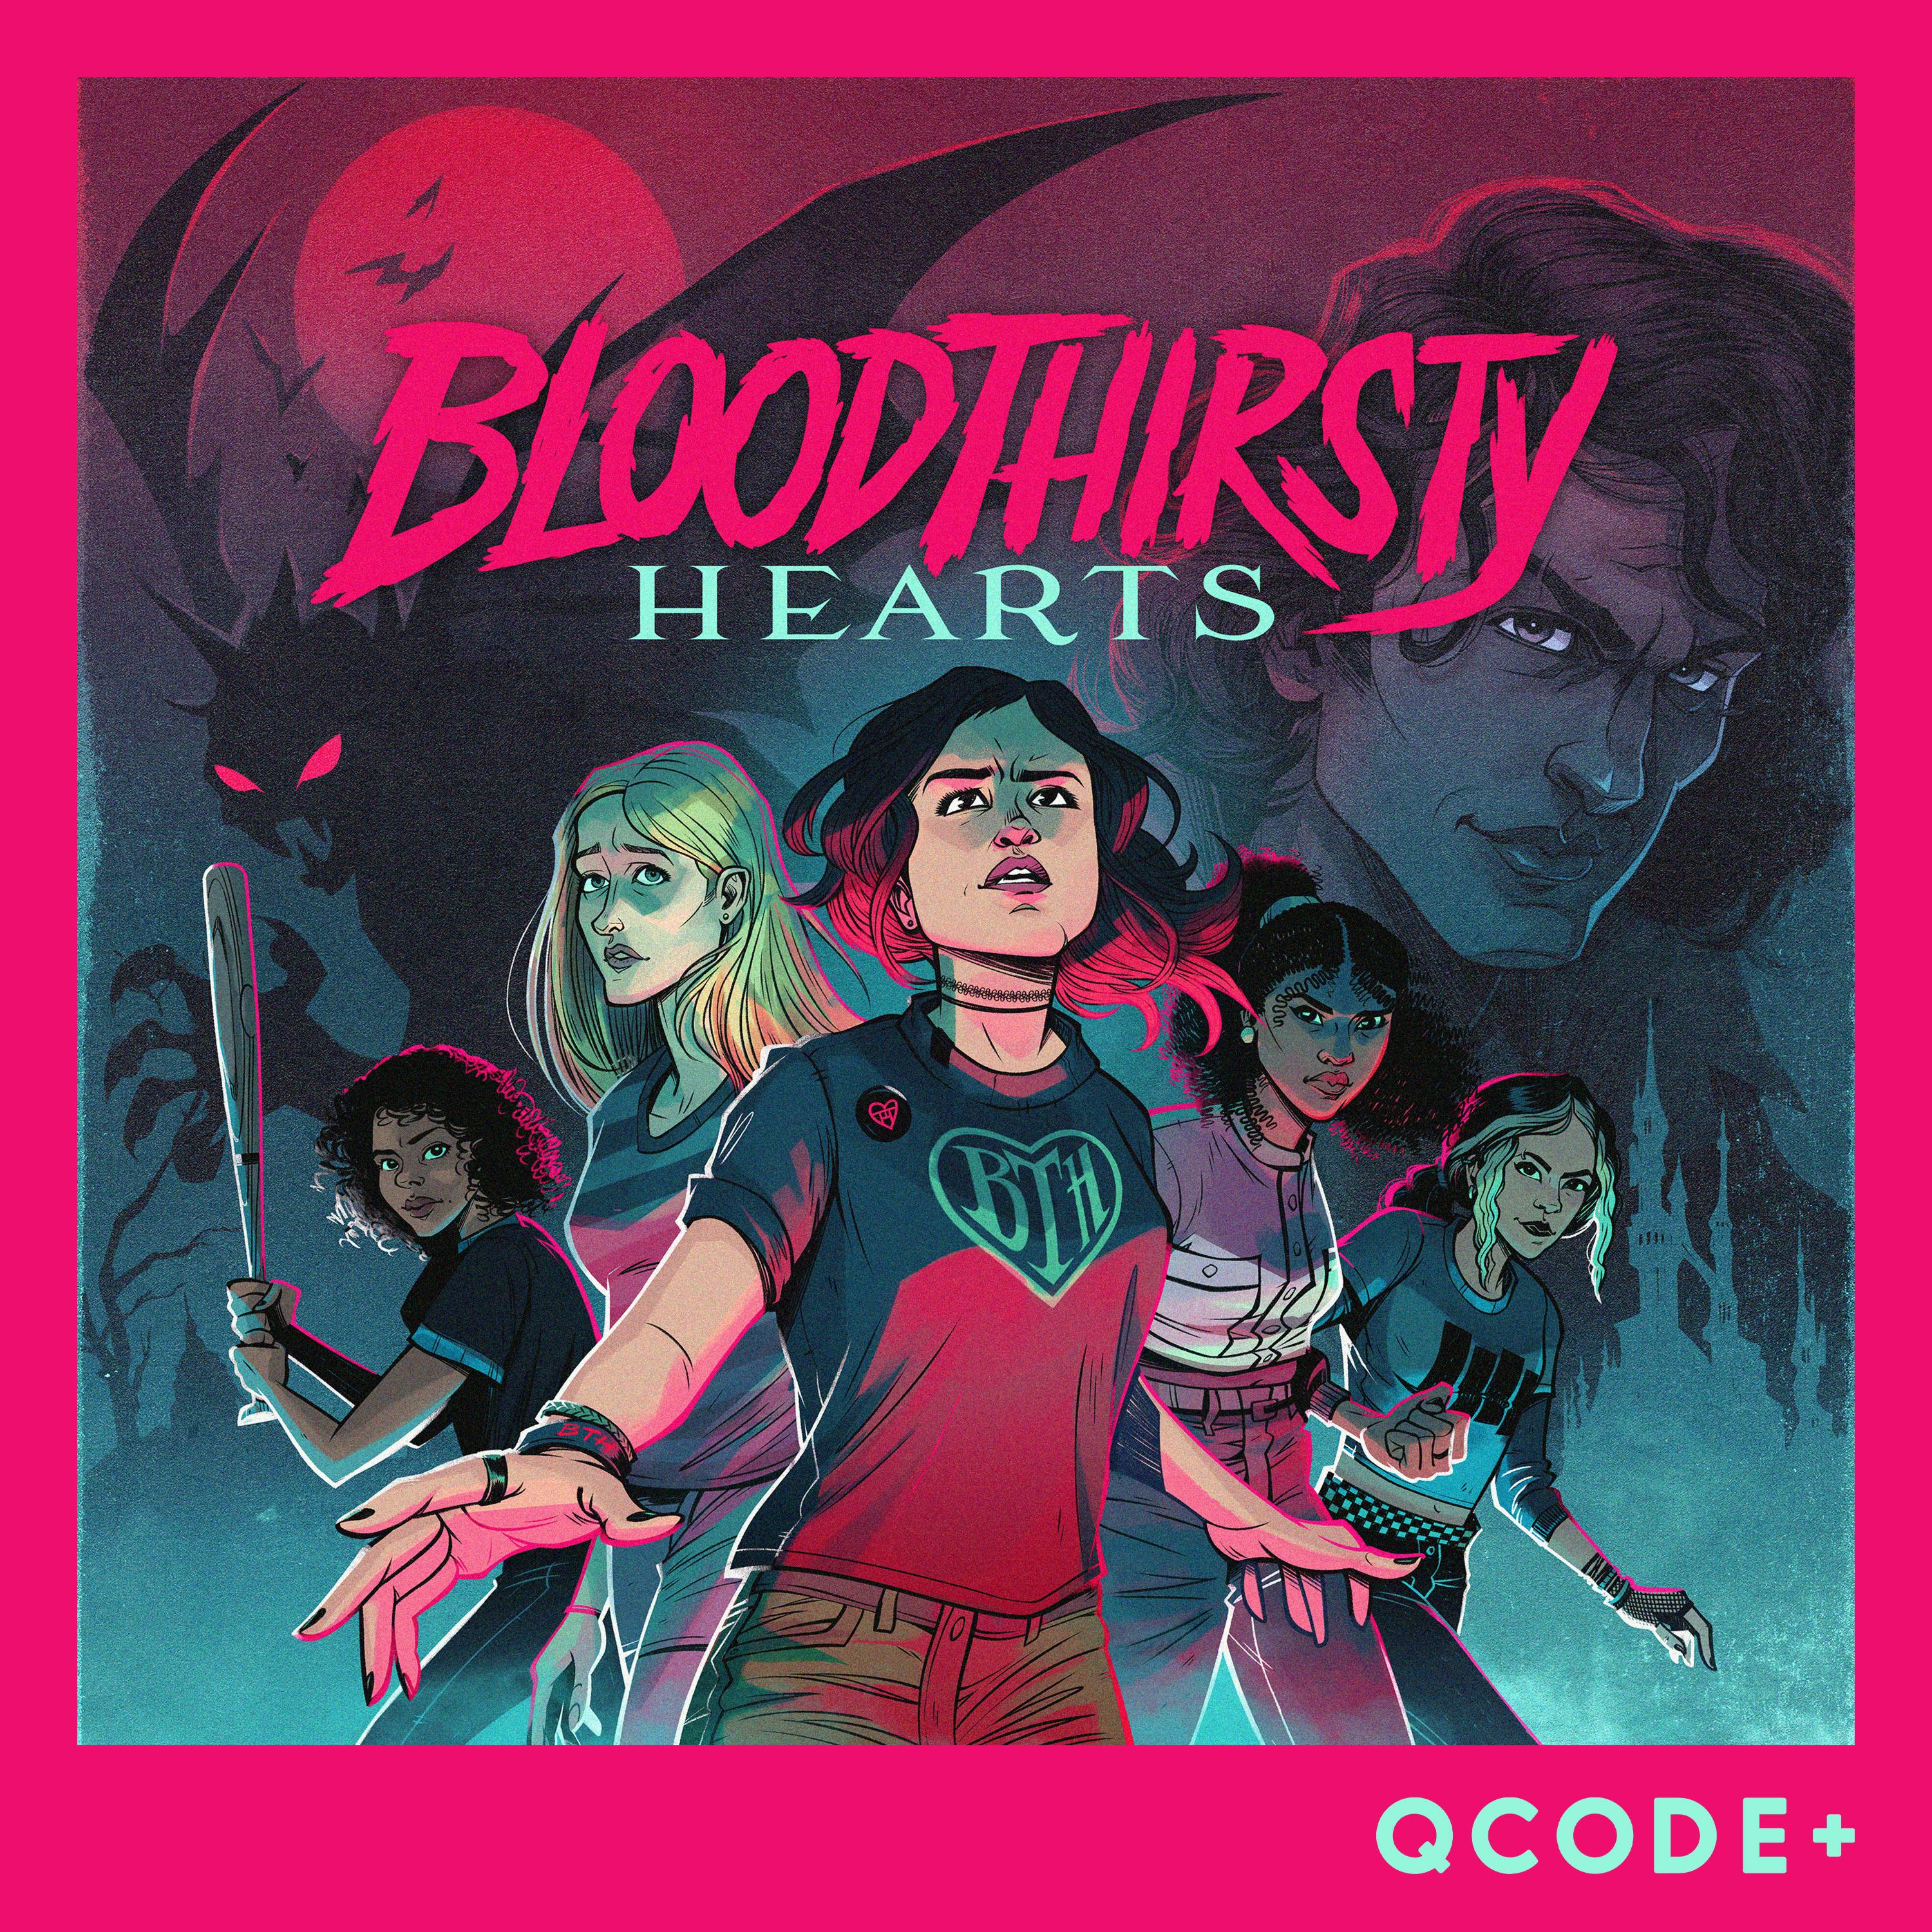 Bloodthirsty Hearts — QCODE+ podcast tile